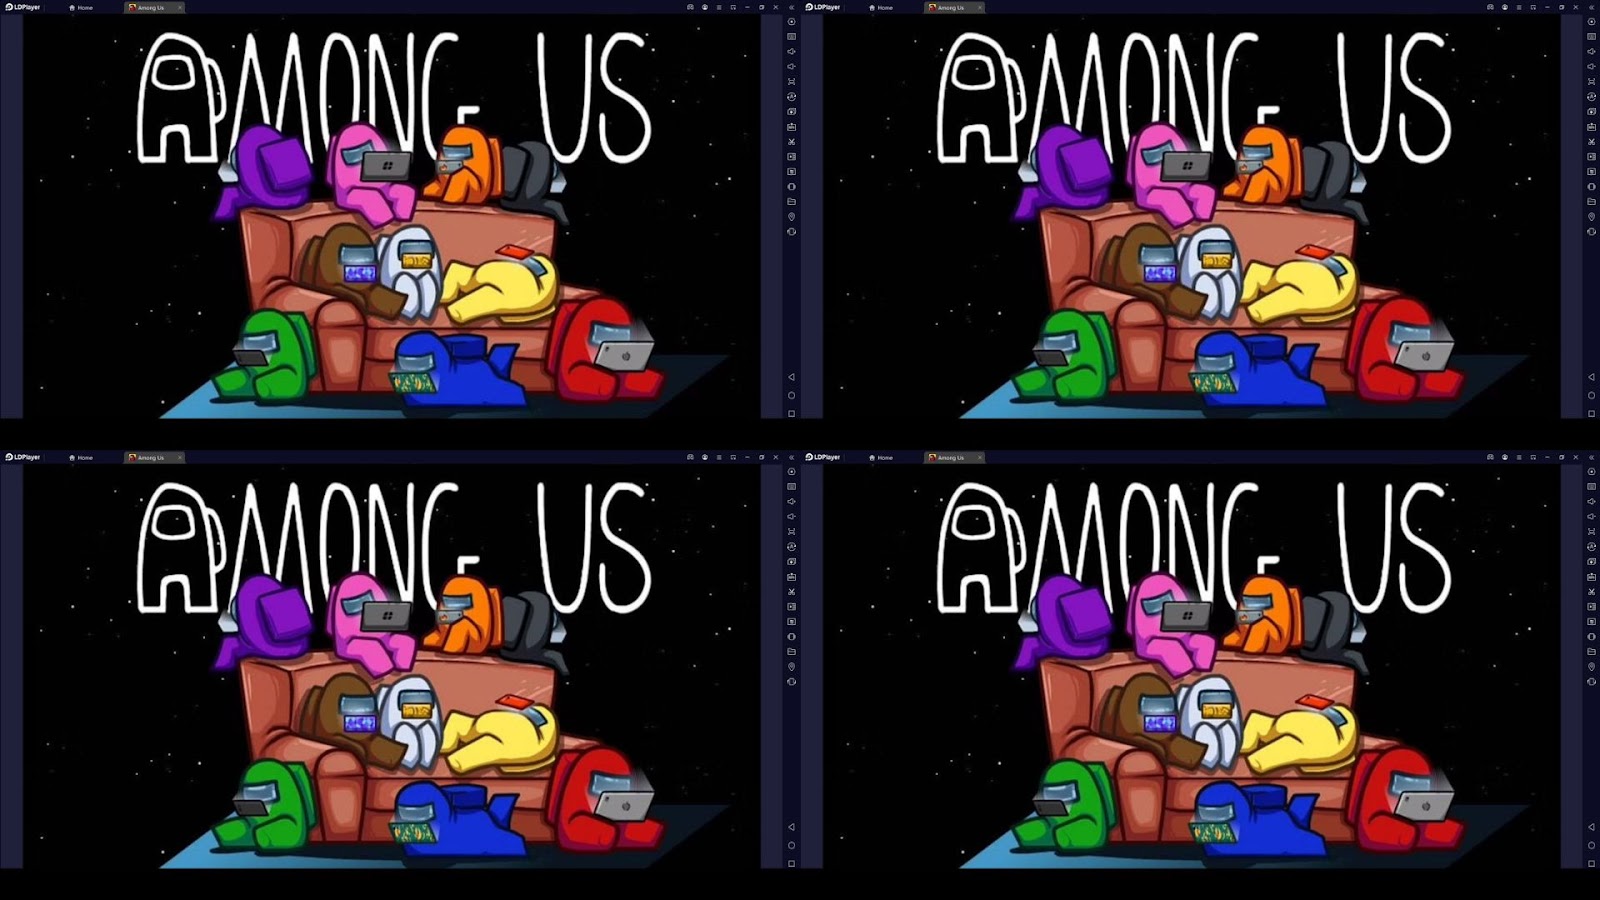 You can download 'Among Us' for free on PC right now